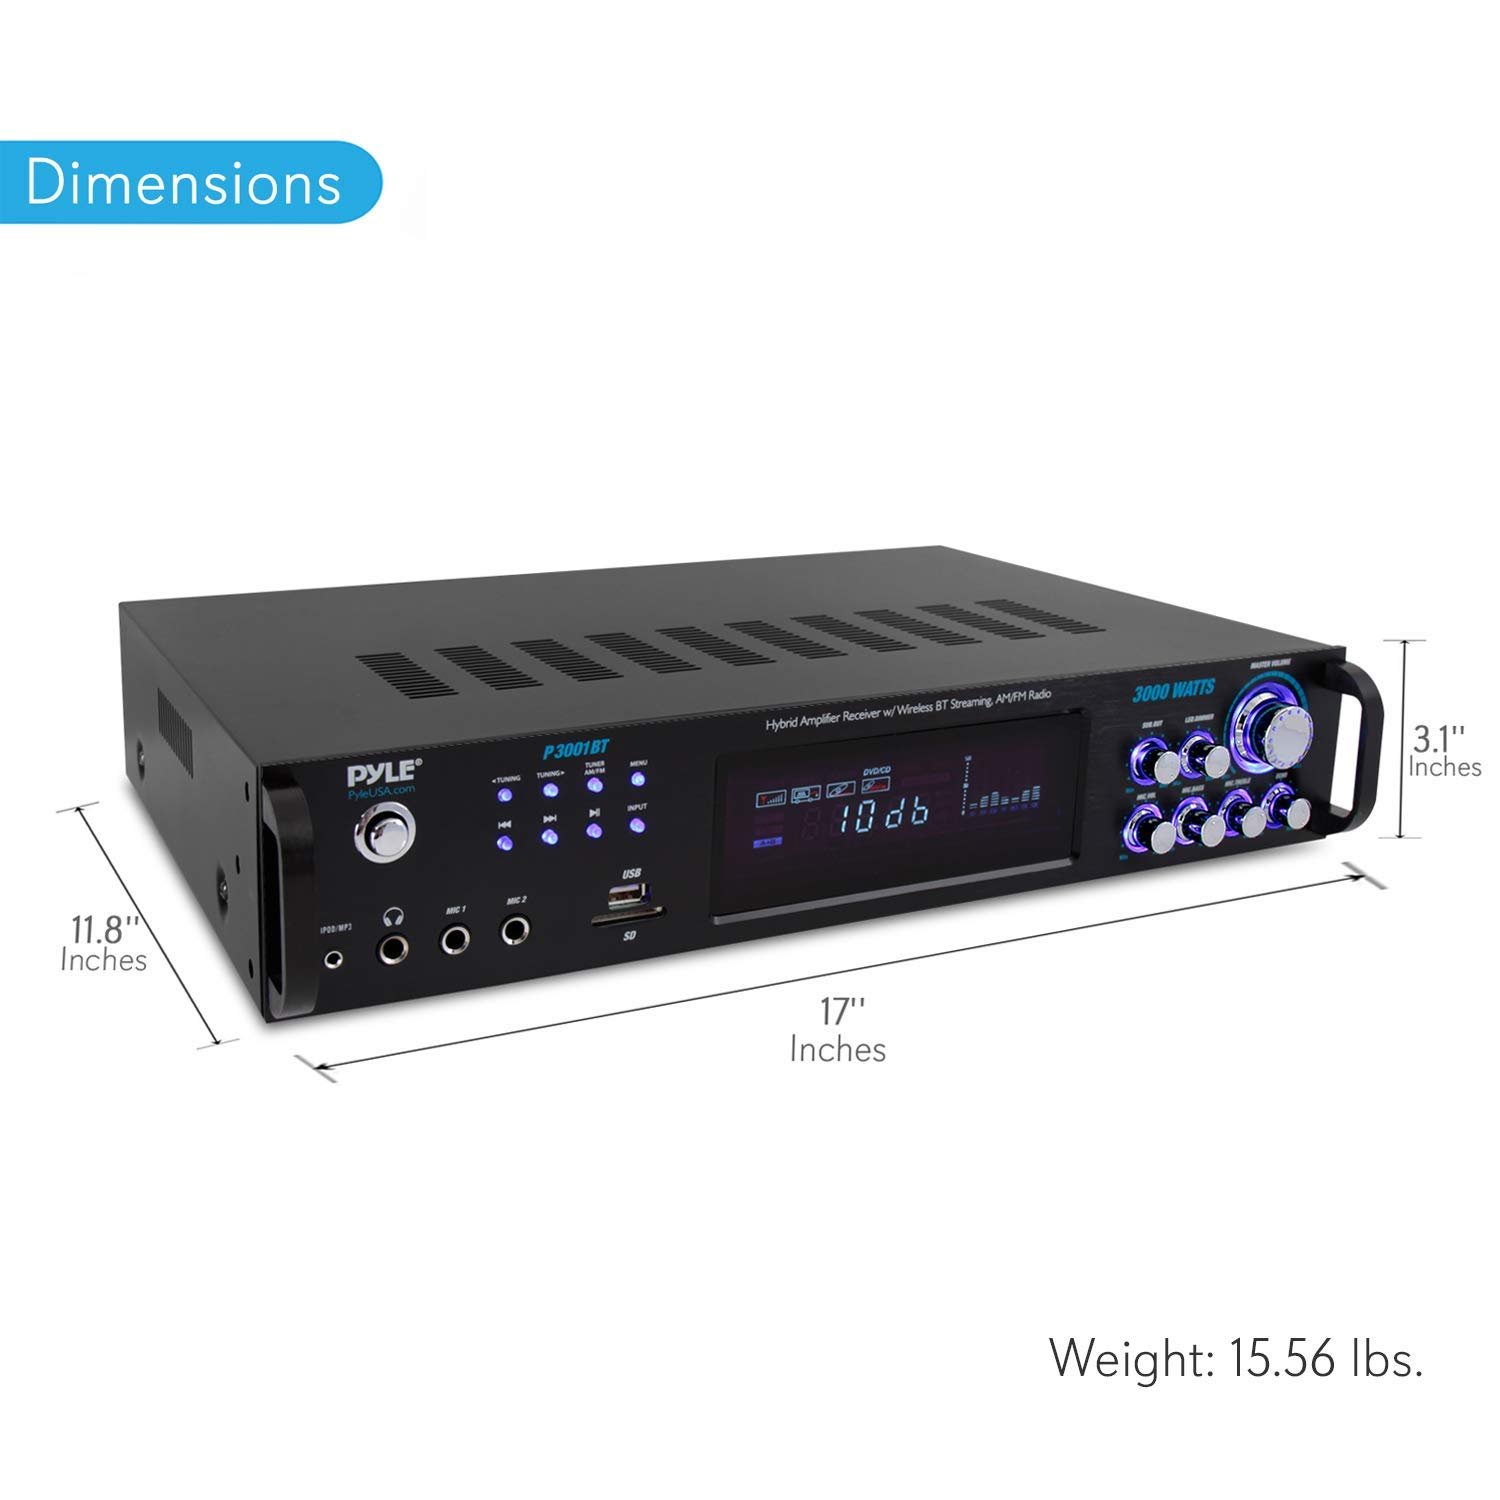 Pyle 3,000 Watt Multi Channel Bluetooth Home Theater Hybrid Amplifier Receiver - image 5 of 9